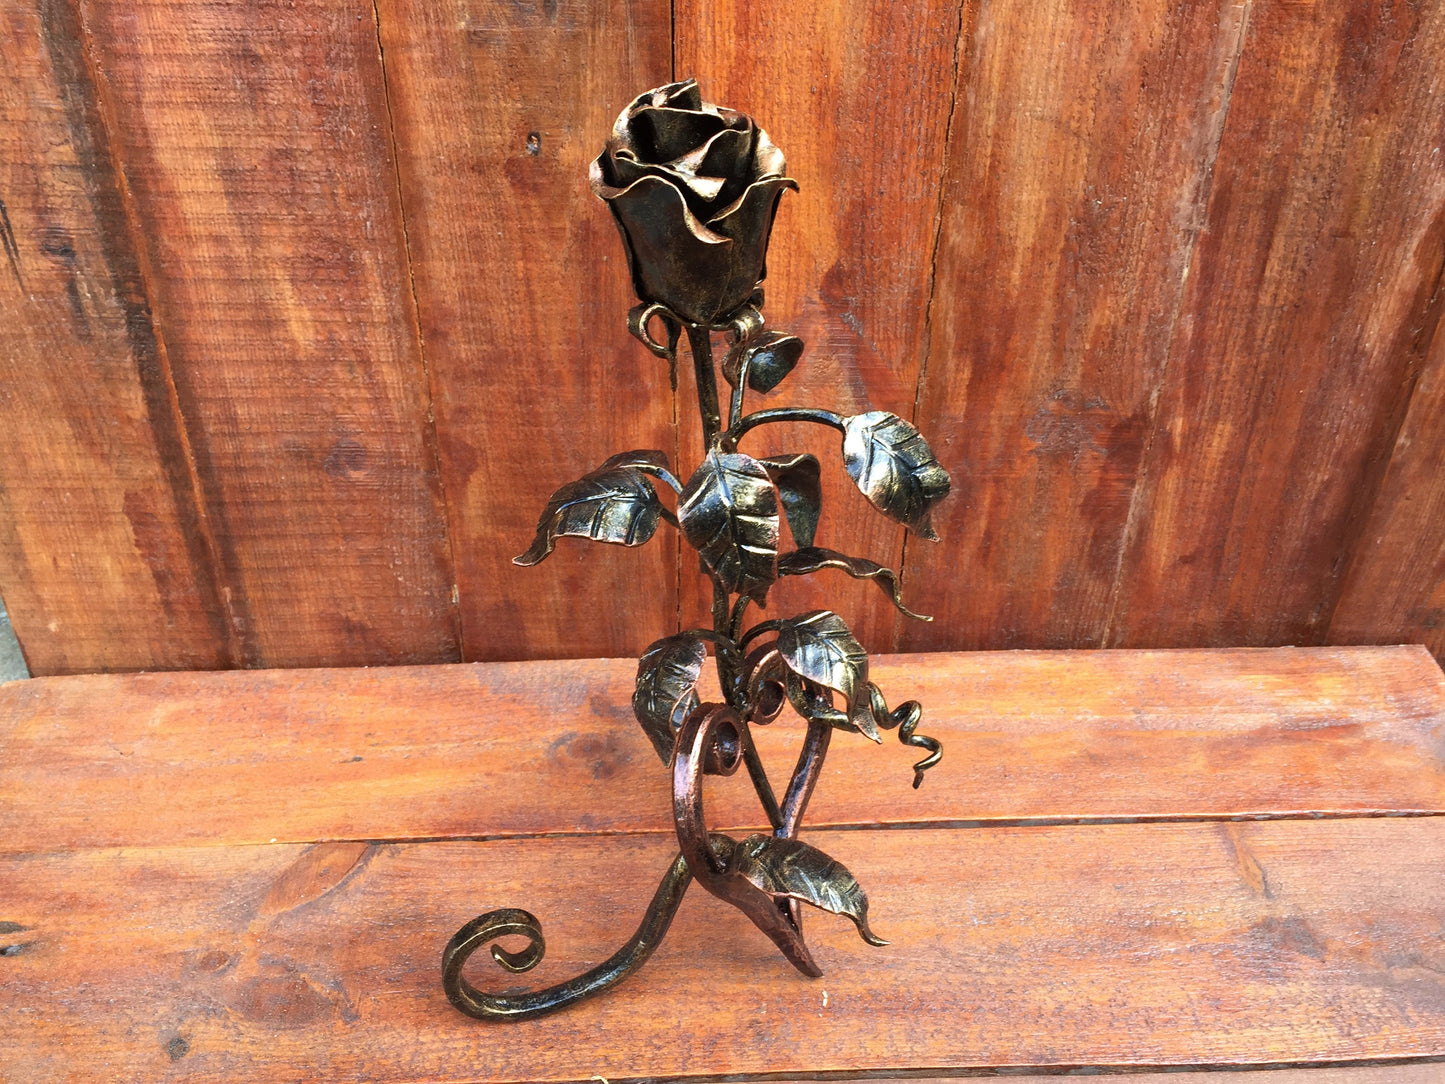 Iron rose, metal rose, steel rose, wedding anniversary, anniversary gift, steampunk, gift for her, metal statue, metal sculpture,forged rose